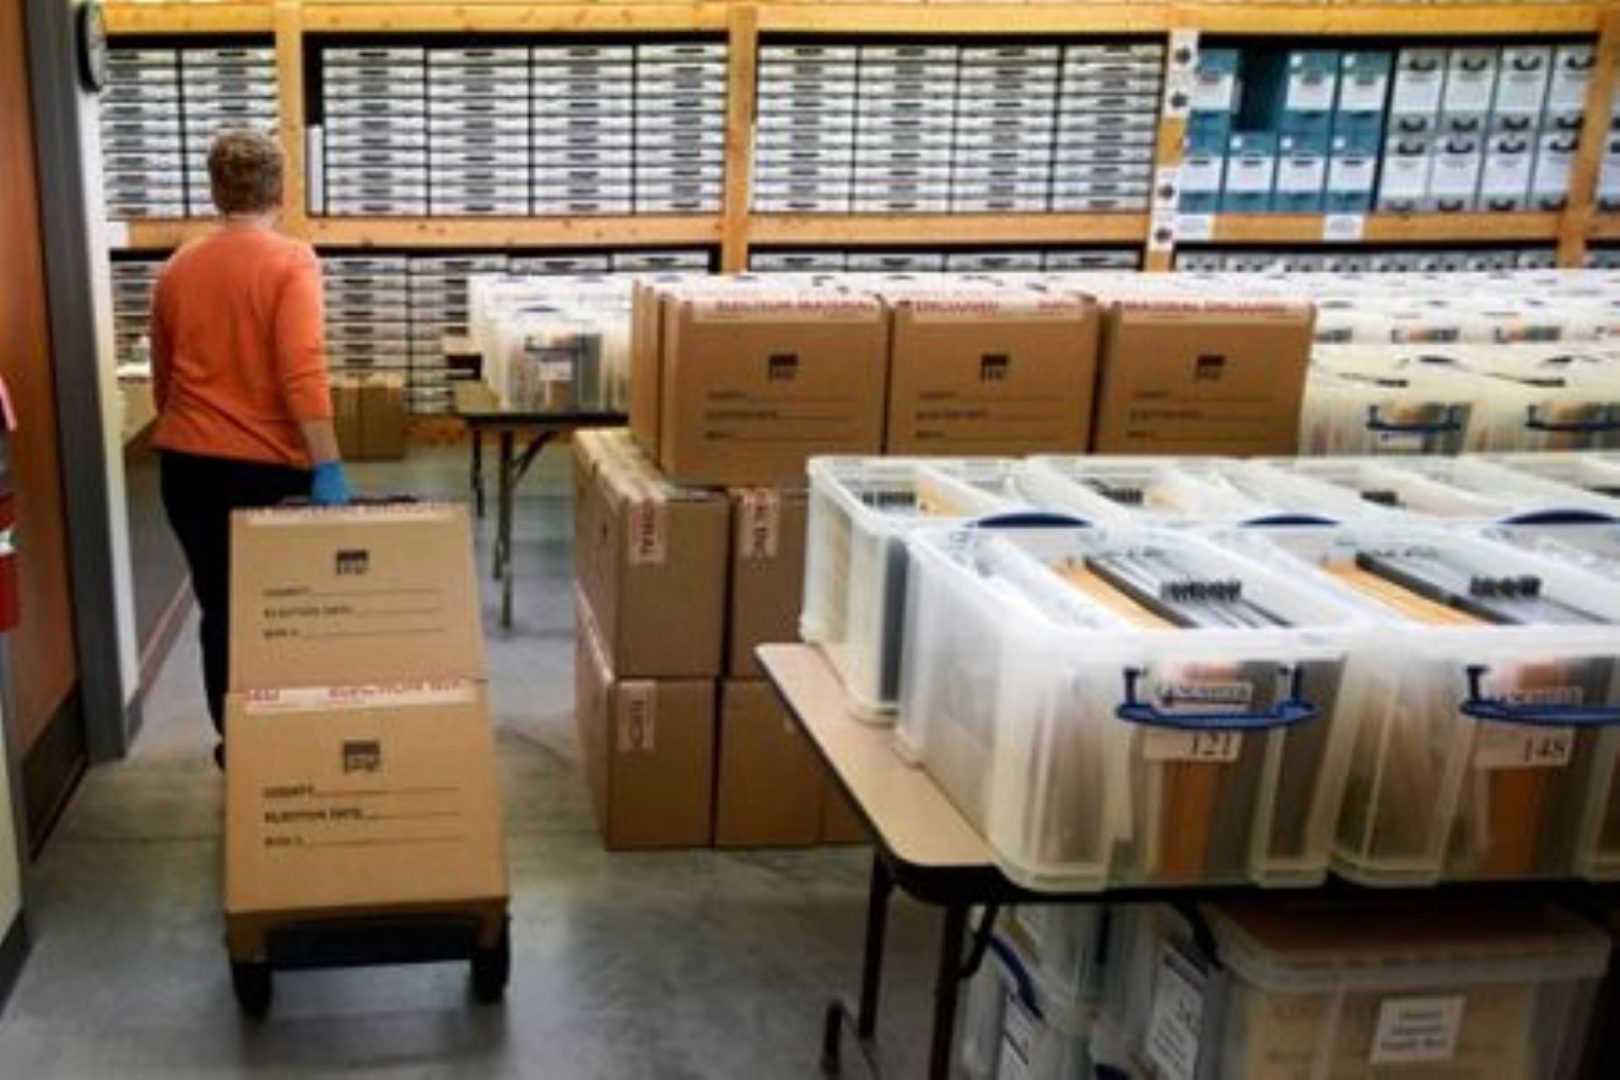  Nadette Cheney wheels in boxes of printed ballots at the Lancaster County Election Committee offices in Lincoln, Neb., April 14, 2020.